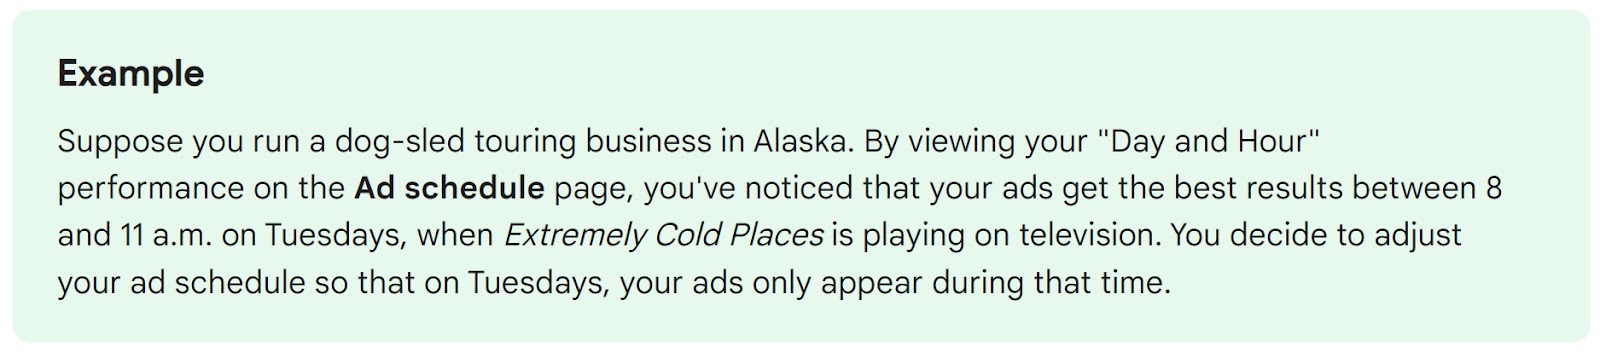 Suppose you run a dog-sled touring business in Alaska. By viewing your "Day and Hour" performance on the Ad schedule page, you've noticed that your ads get the best results between 8 and 11 a.m. on Tuesdays, when Extremely Cold Places is paying on television. You decide to adjust your ad schedule so that on Tuesdays, your ads only appear during that time.